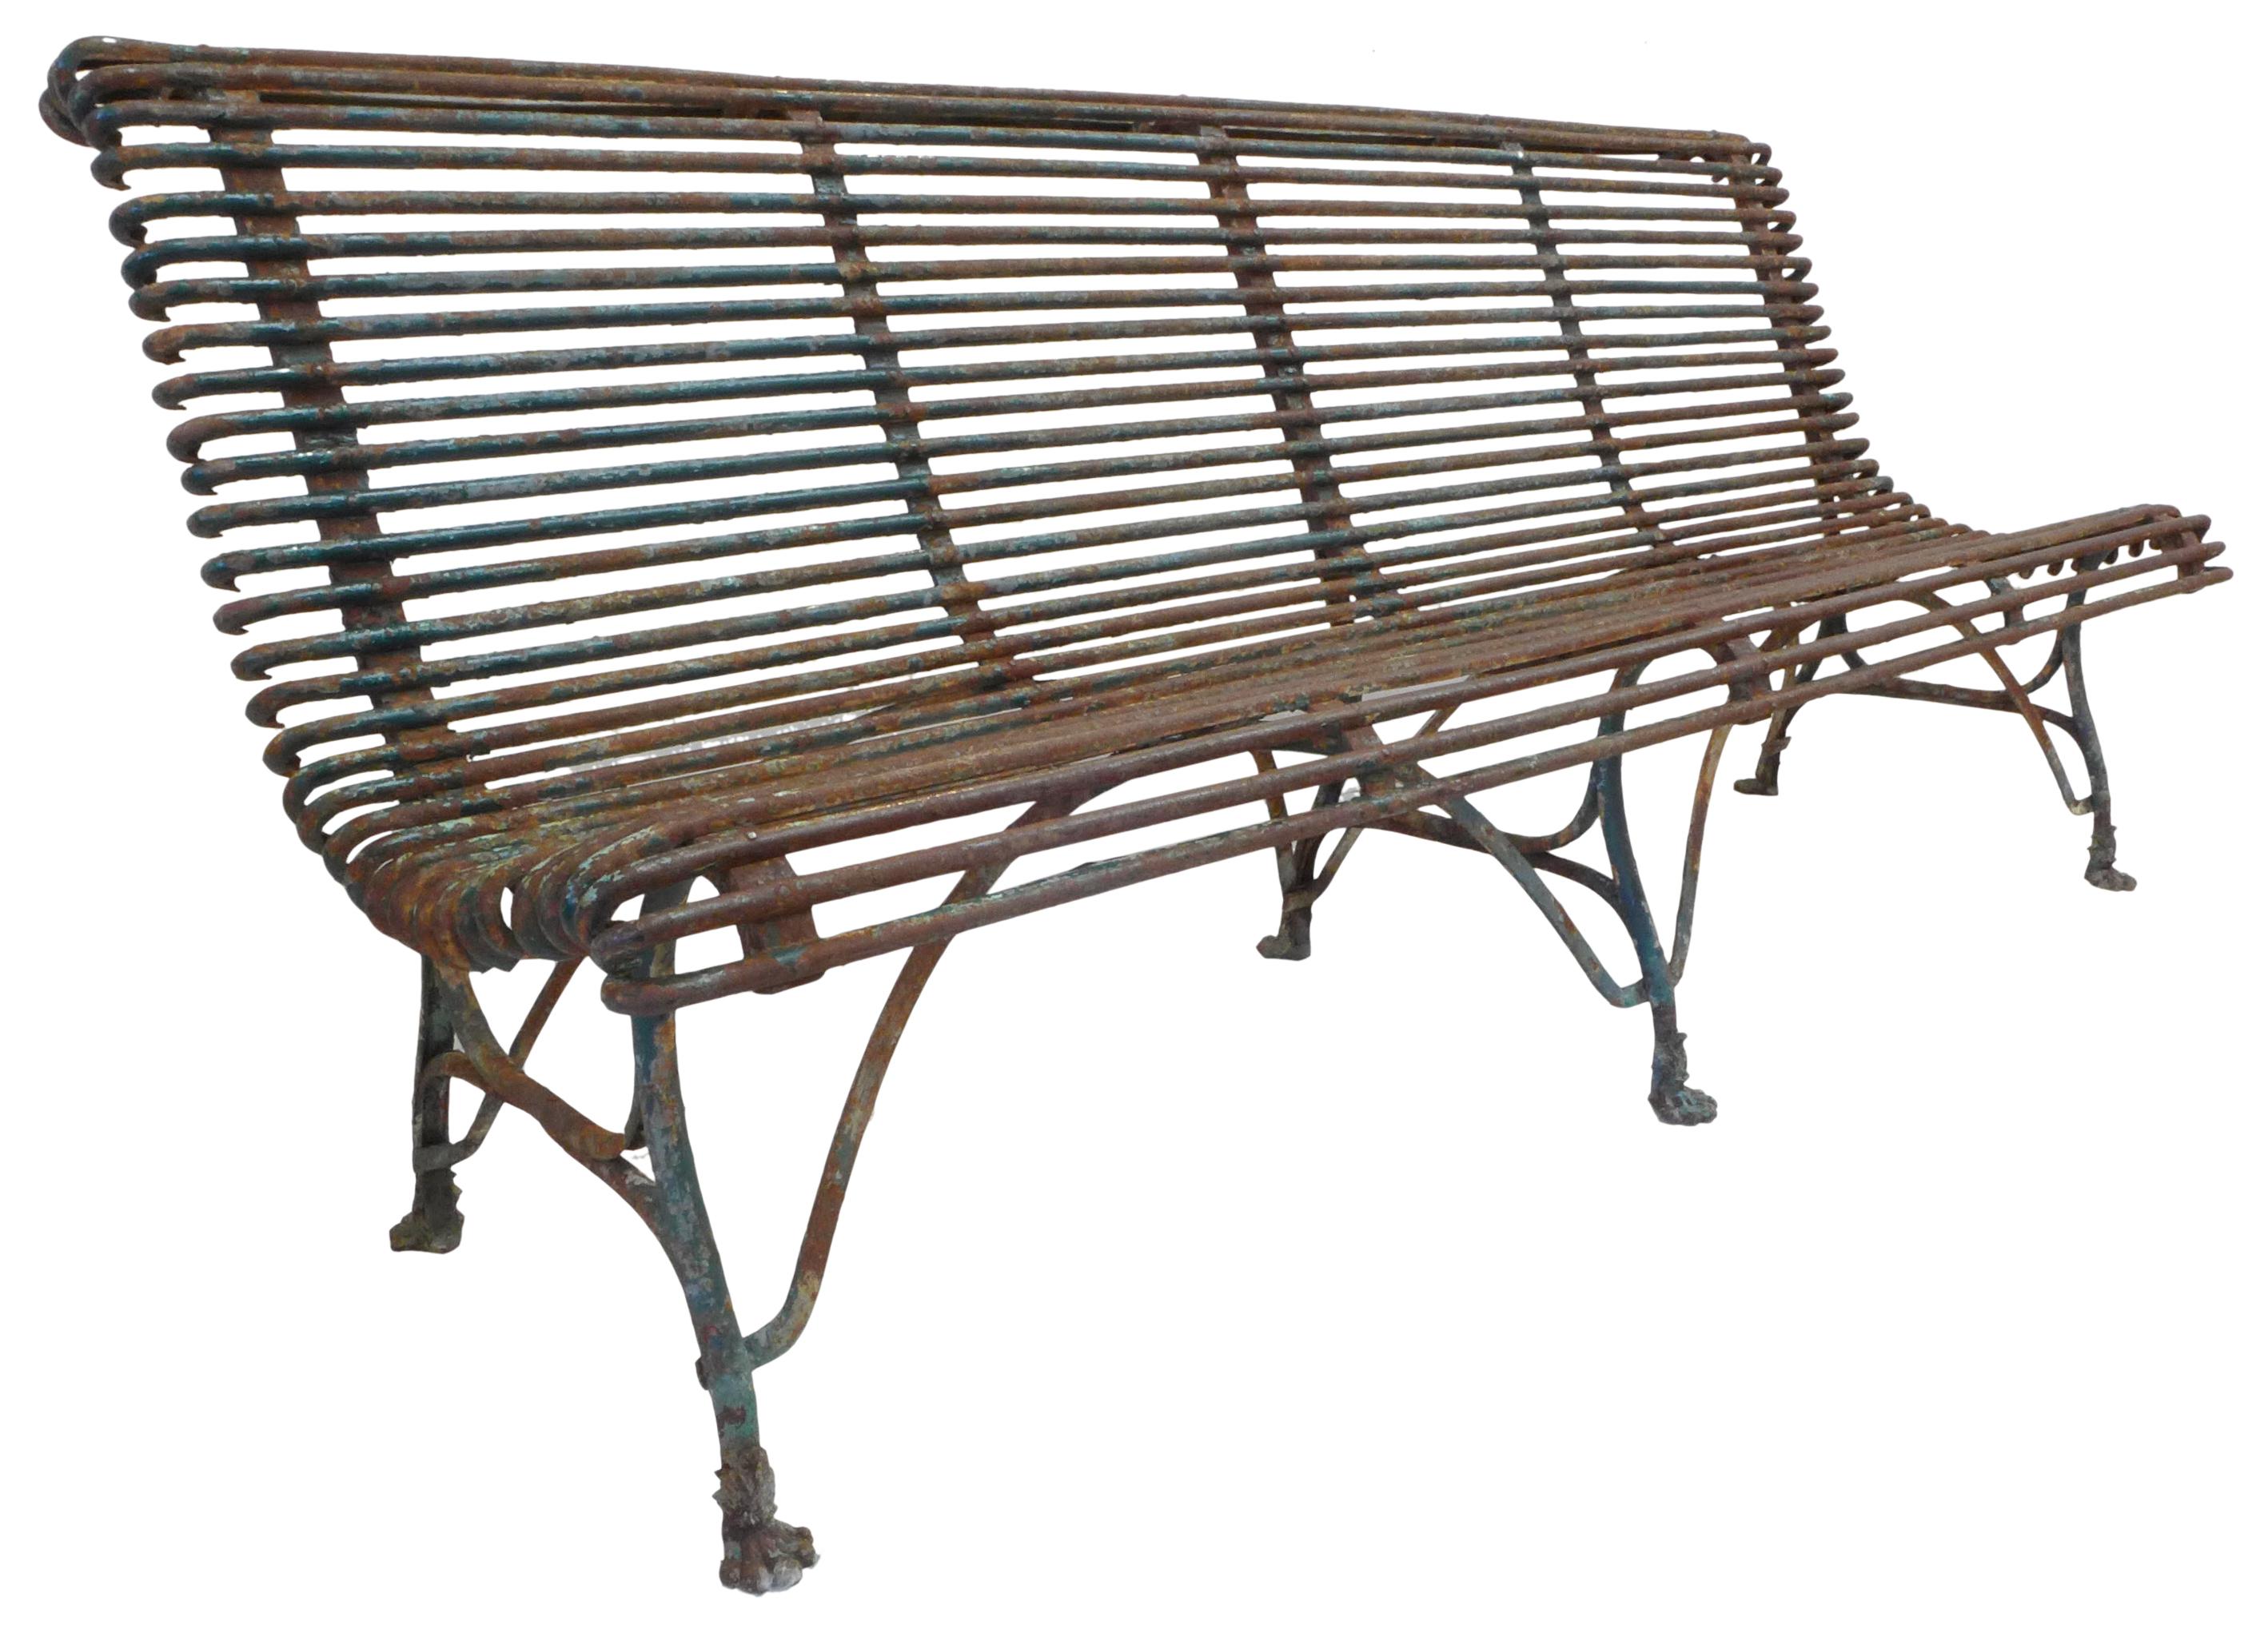 A fantastic mid-19th century French Arras wrought iron garden bench. Standing on claw feet and filled with great curvilinear detail, an armless 4-seat surface with alluring repeating lines. An incredible, untouched surface from many years outdoors;